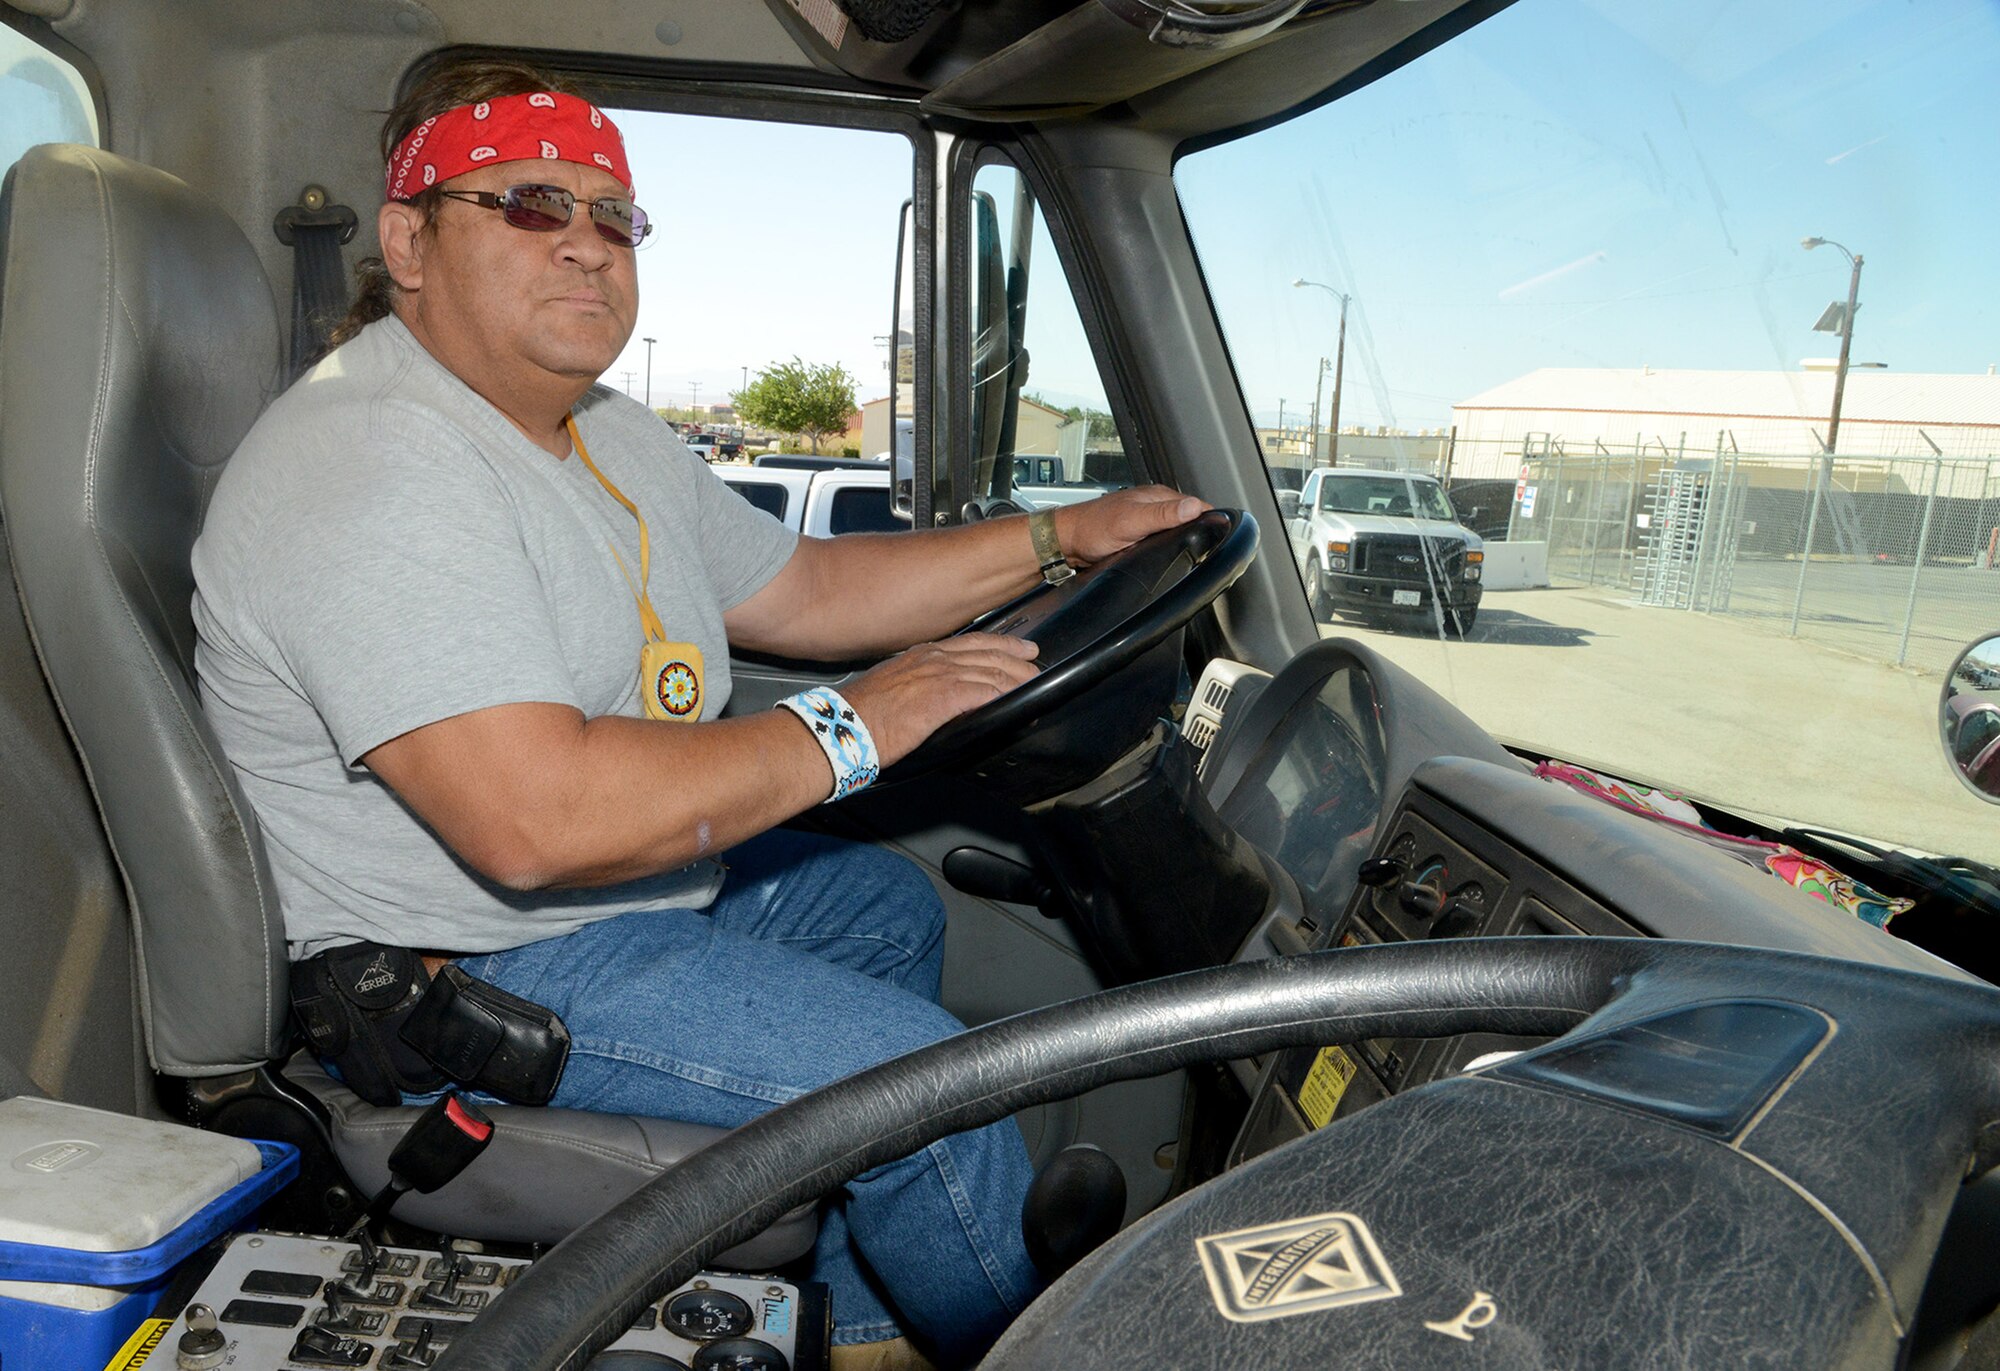 Heavy equipment operator Robin “Bubba” Hairston, 412th Civil Engineer Group, prepares to operate his sweeper truck, protecting lives and equipment by keeping the Edwards flightline free from debris . Hairston was recently honored by the Society of American Indian Government Employees for his contributions to the Edwards mission and to American Indians in government service. (U.S. Air Force photo by Christopher Ball.)